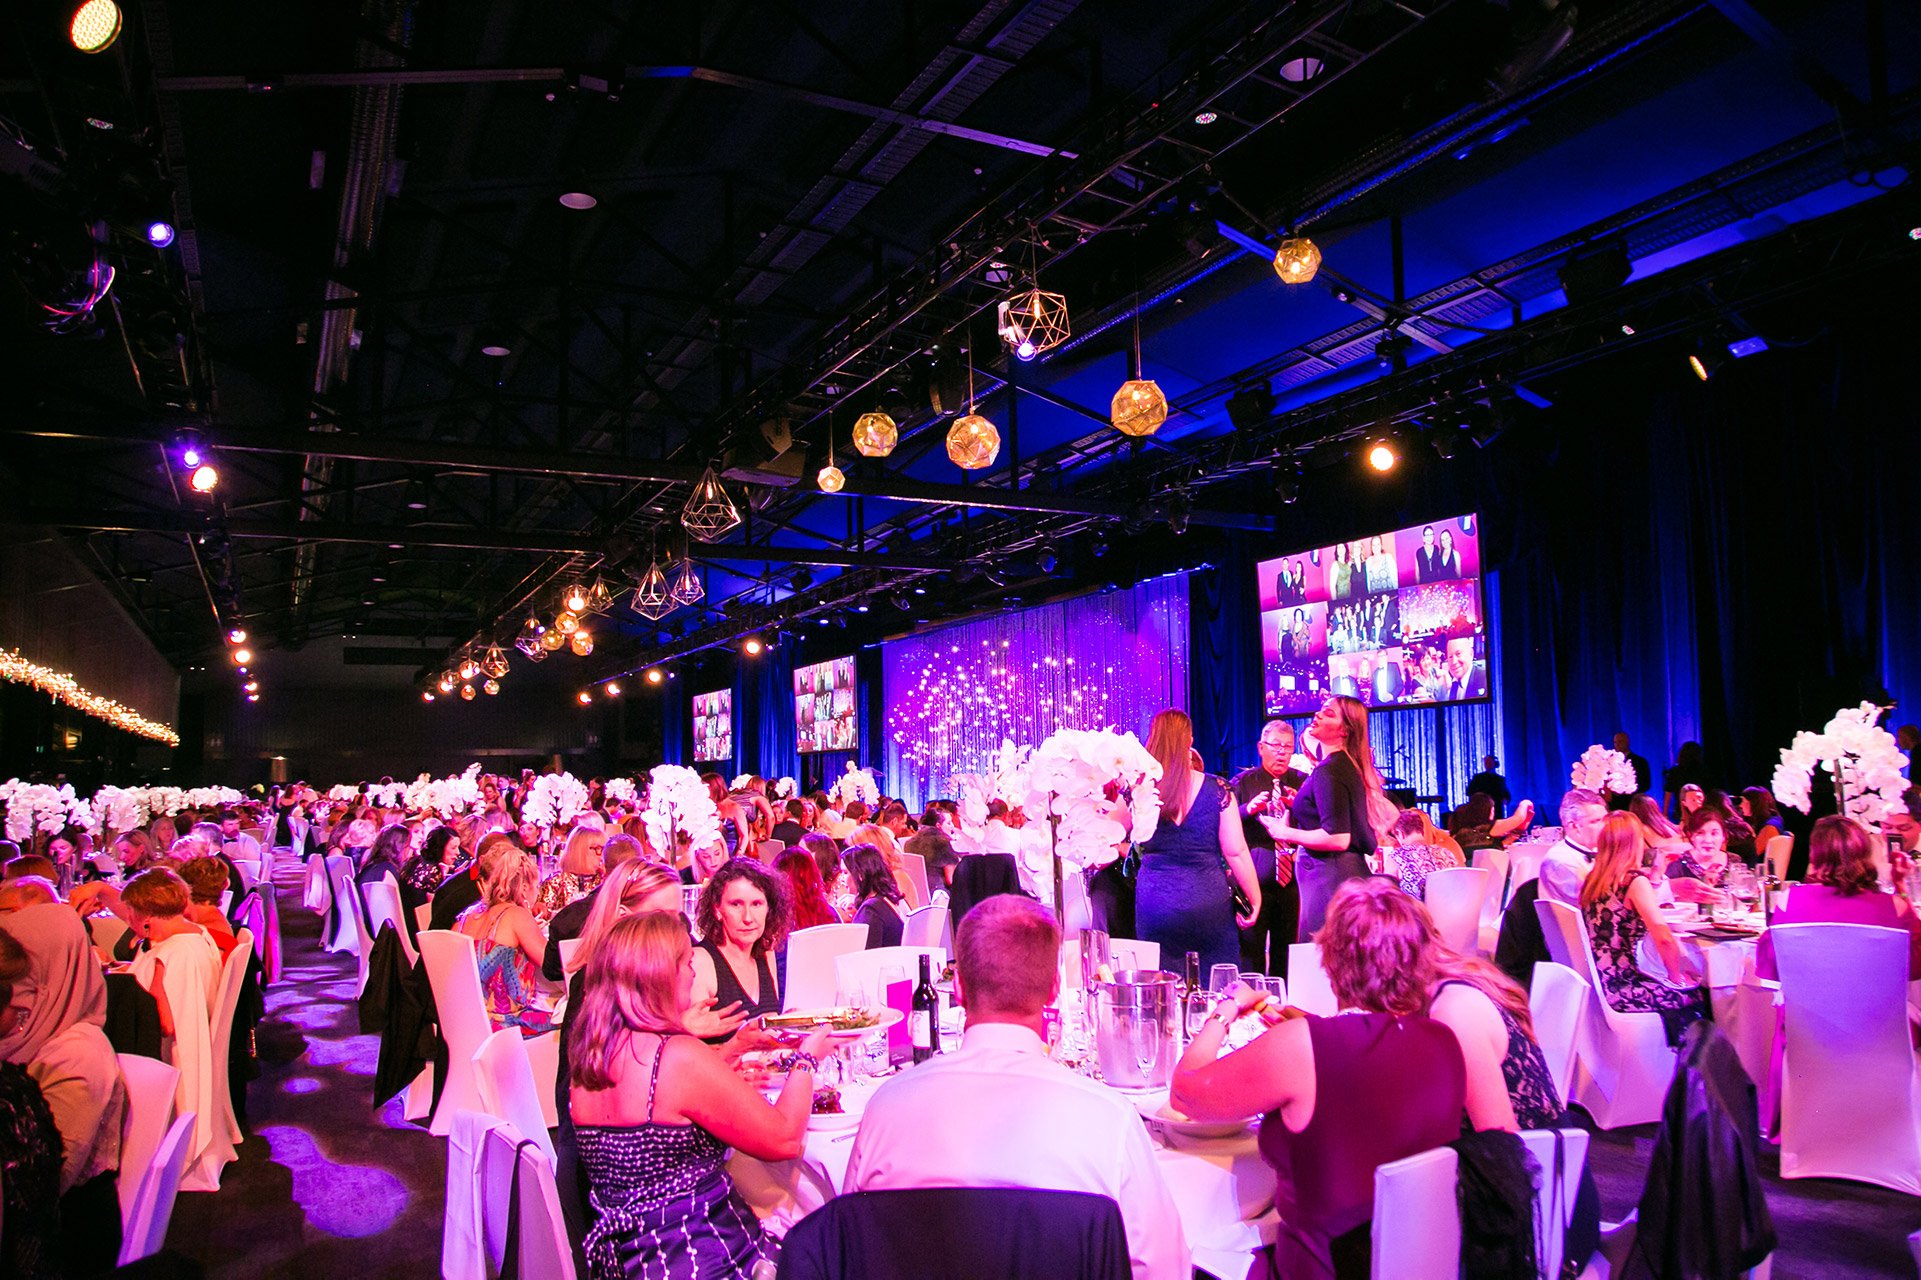  ballroom guests seated at tables gala dinner brisbane kirsten cox photographer events 